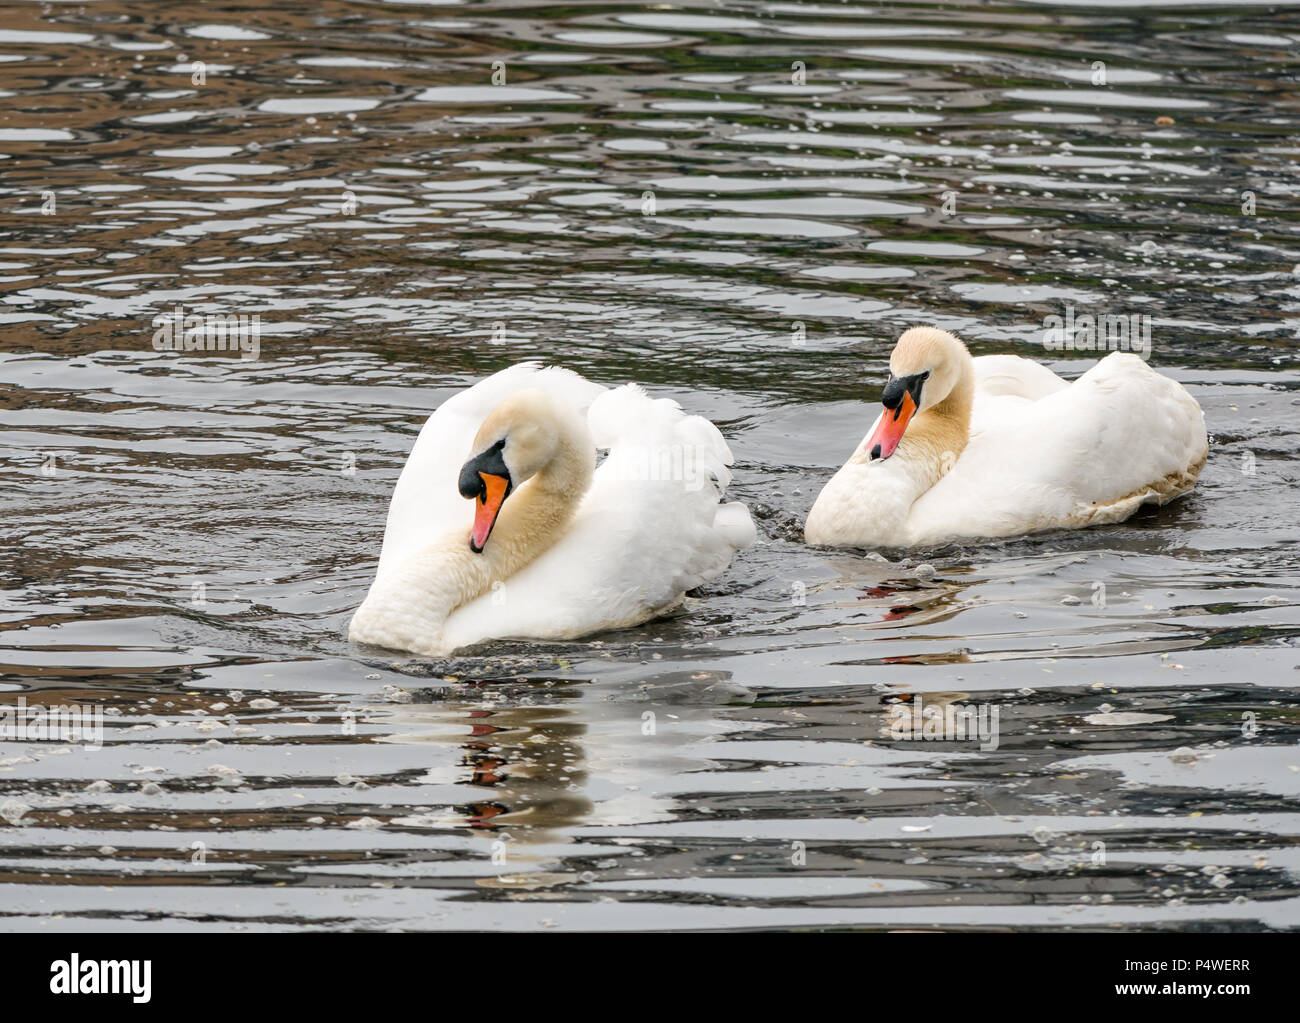 Two adult mute swans, Cygnus olor, in courtship behaviour ritual, imitating each other’s movements Stock Photo